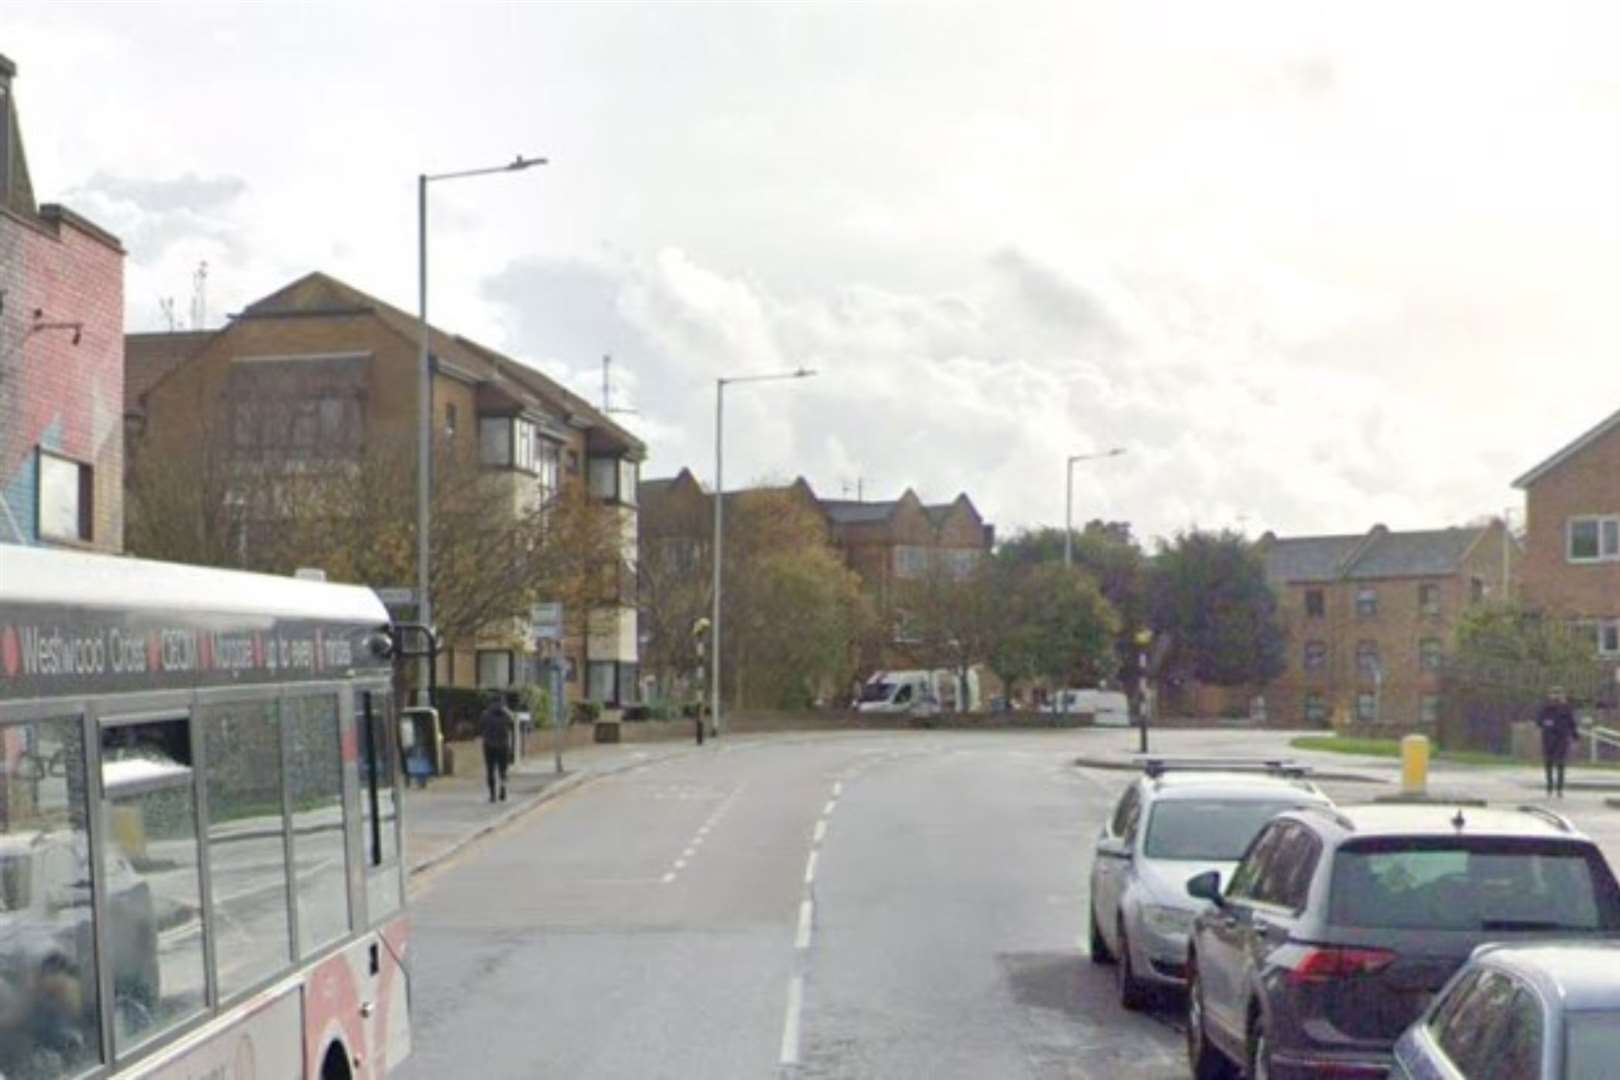 The incident took place at a bus stop in Churchfield Place, Margate, near St John's Road. Picture: Google Street View